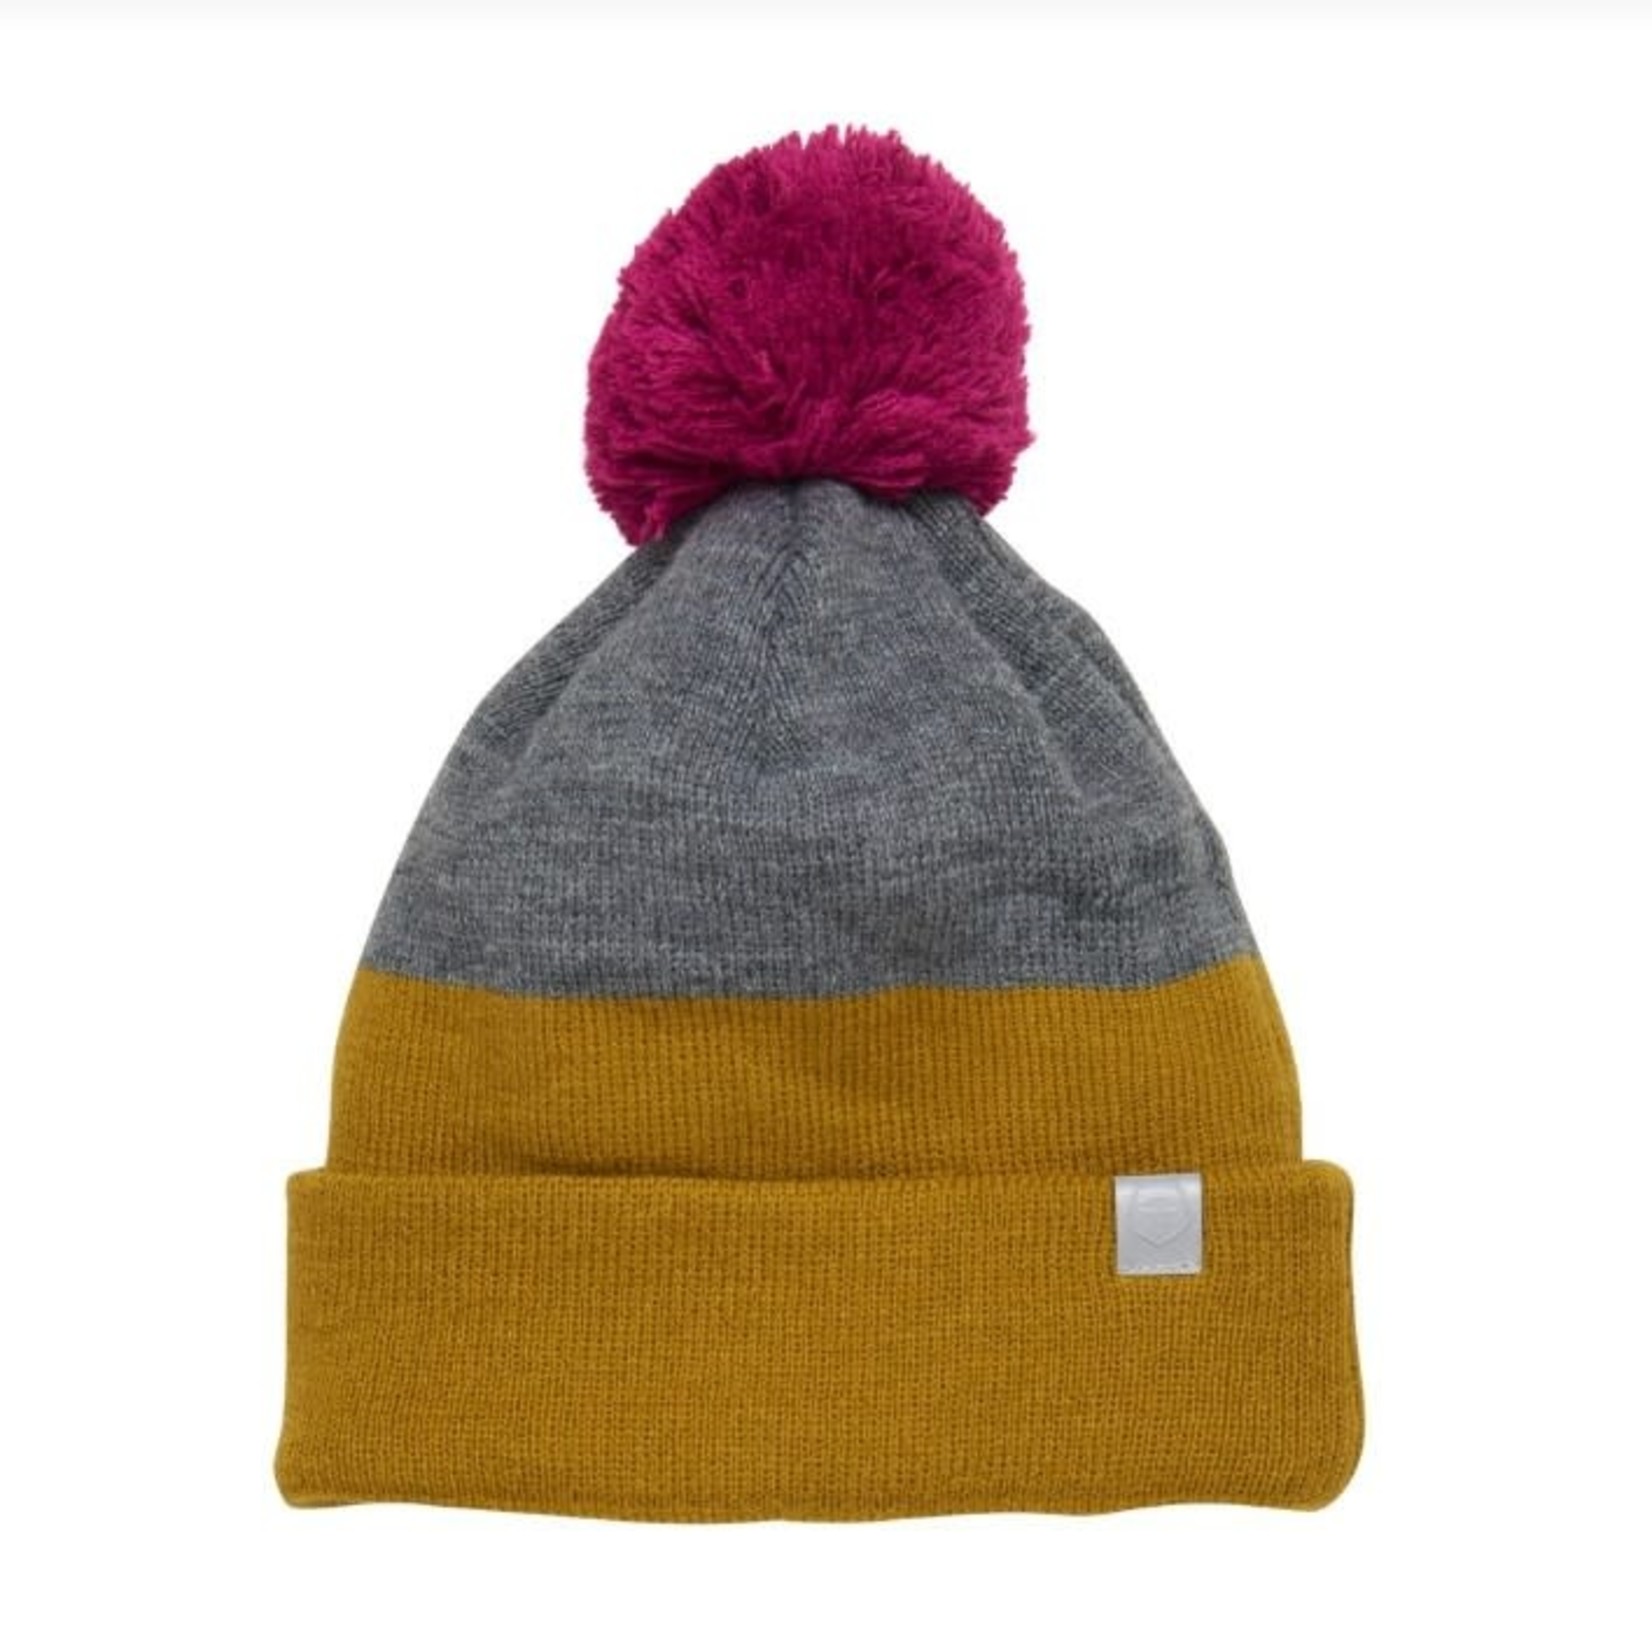 Color Kids COLOR KIDS - Knit winter hat - Mustard and grey with fuchsiapompom